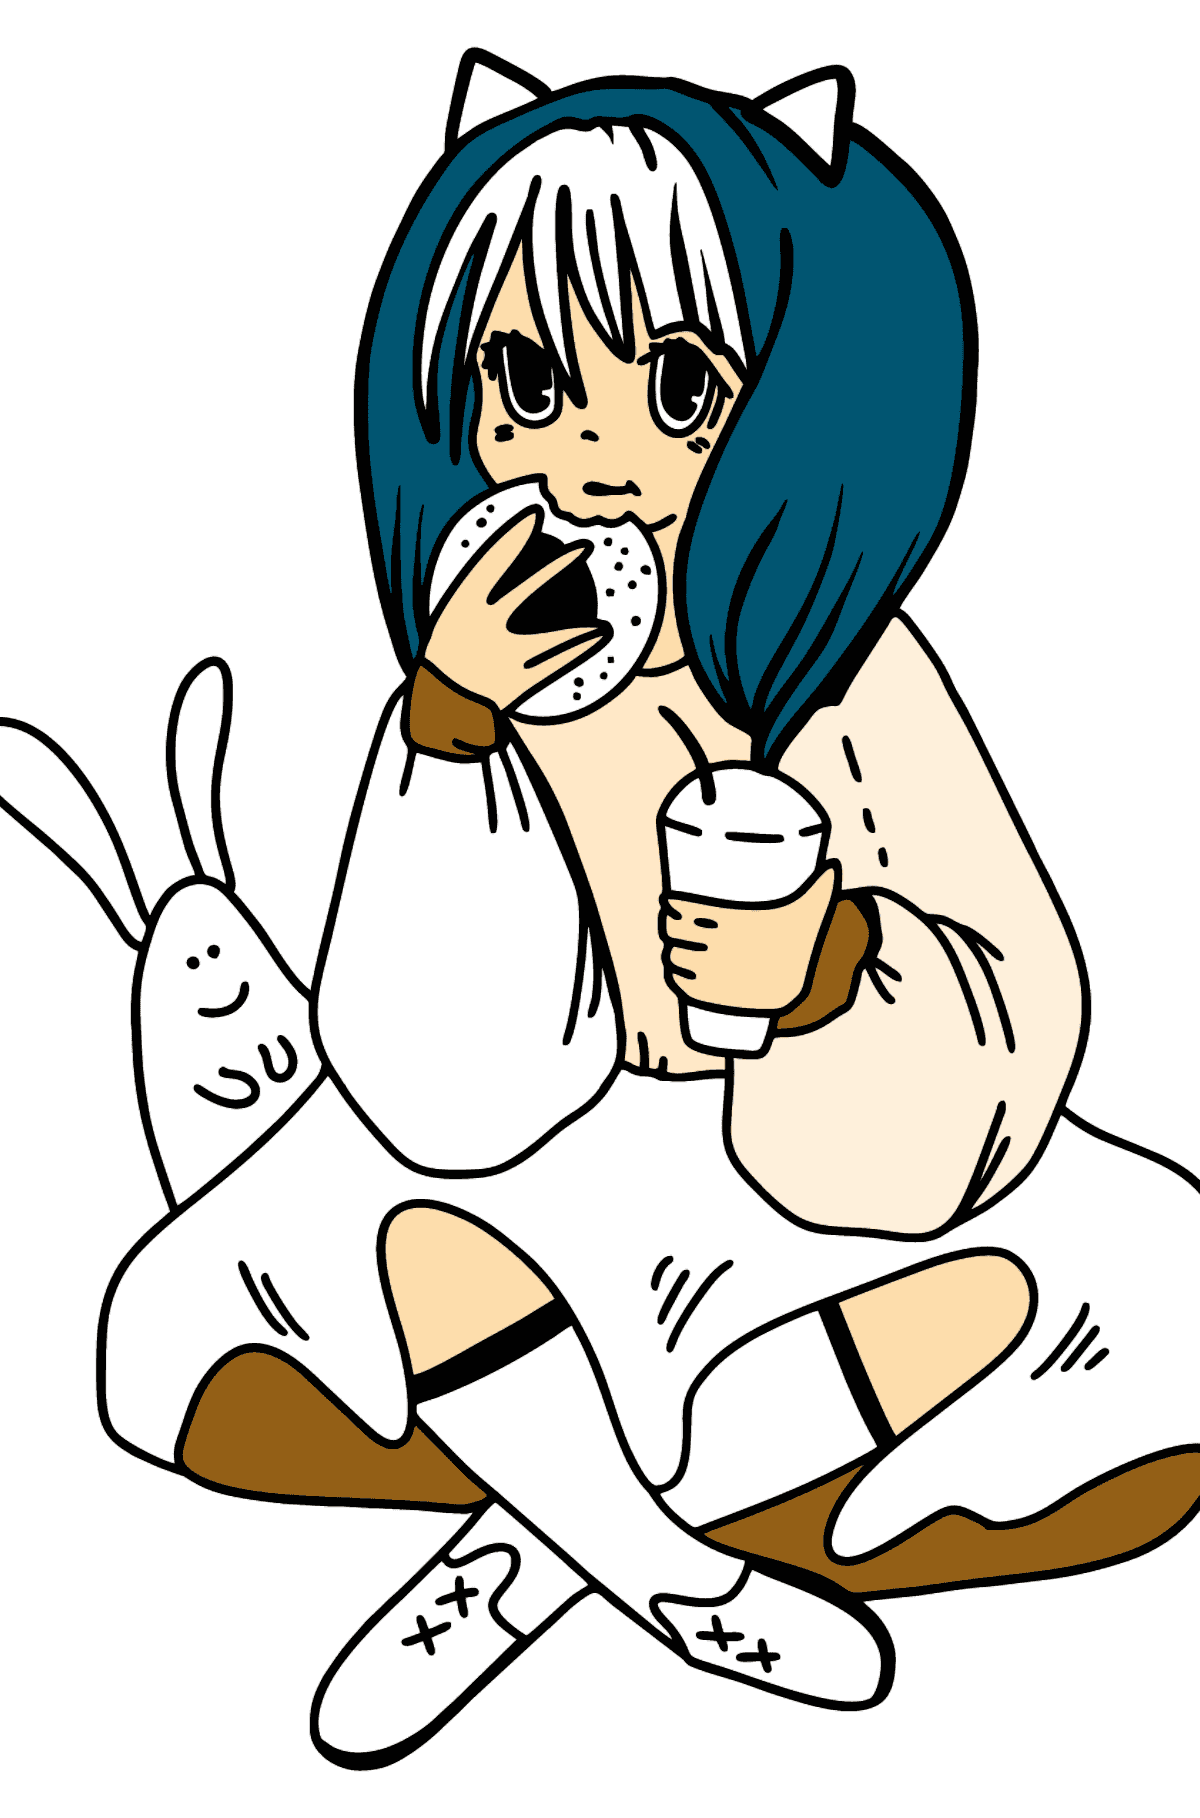 Anime Girl Eating coloring page - Coloring Pages for Kids